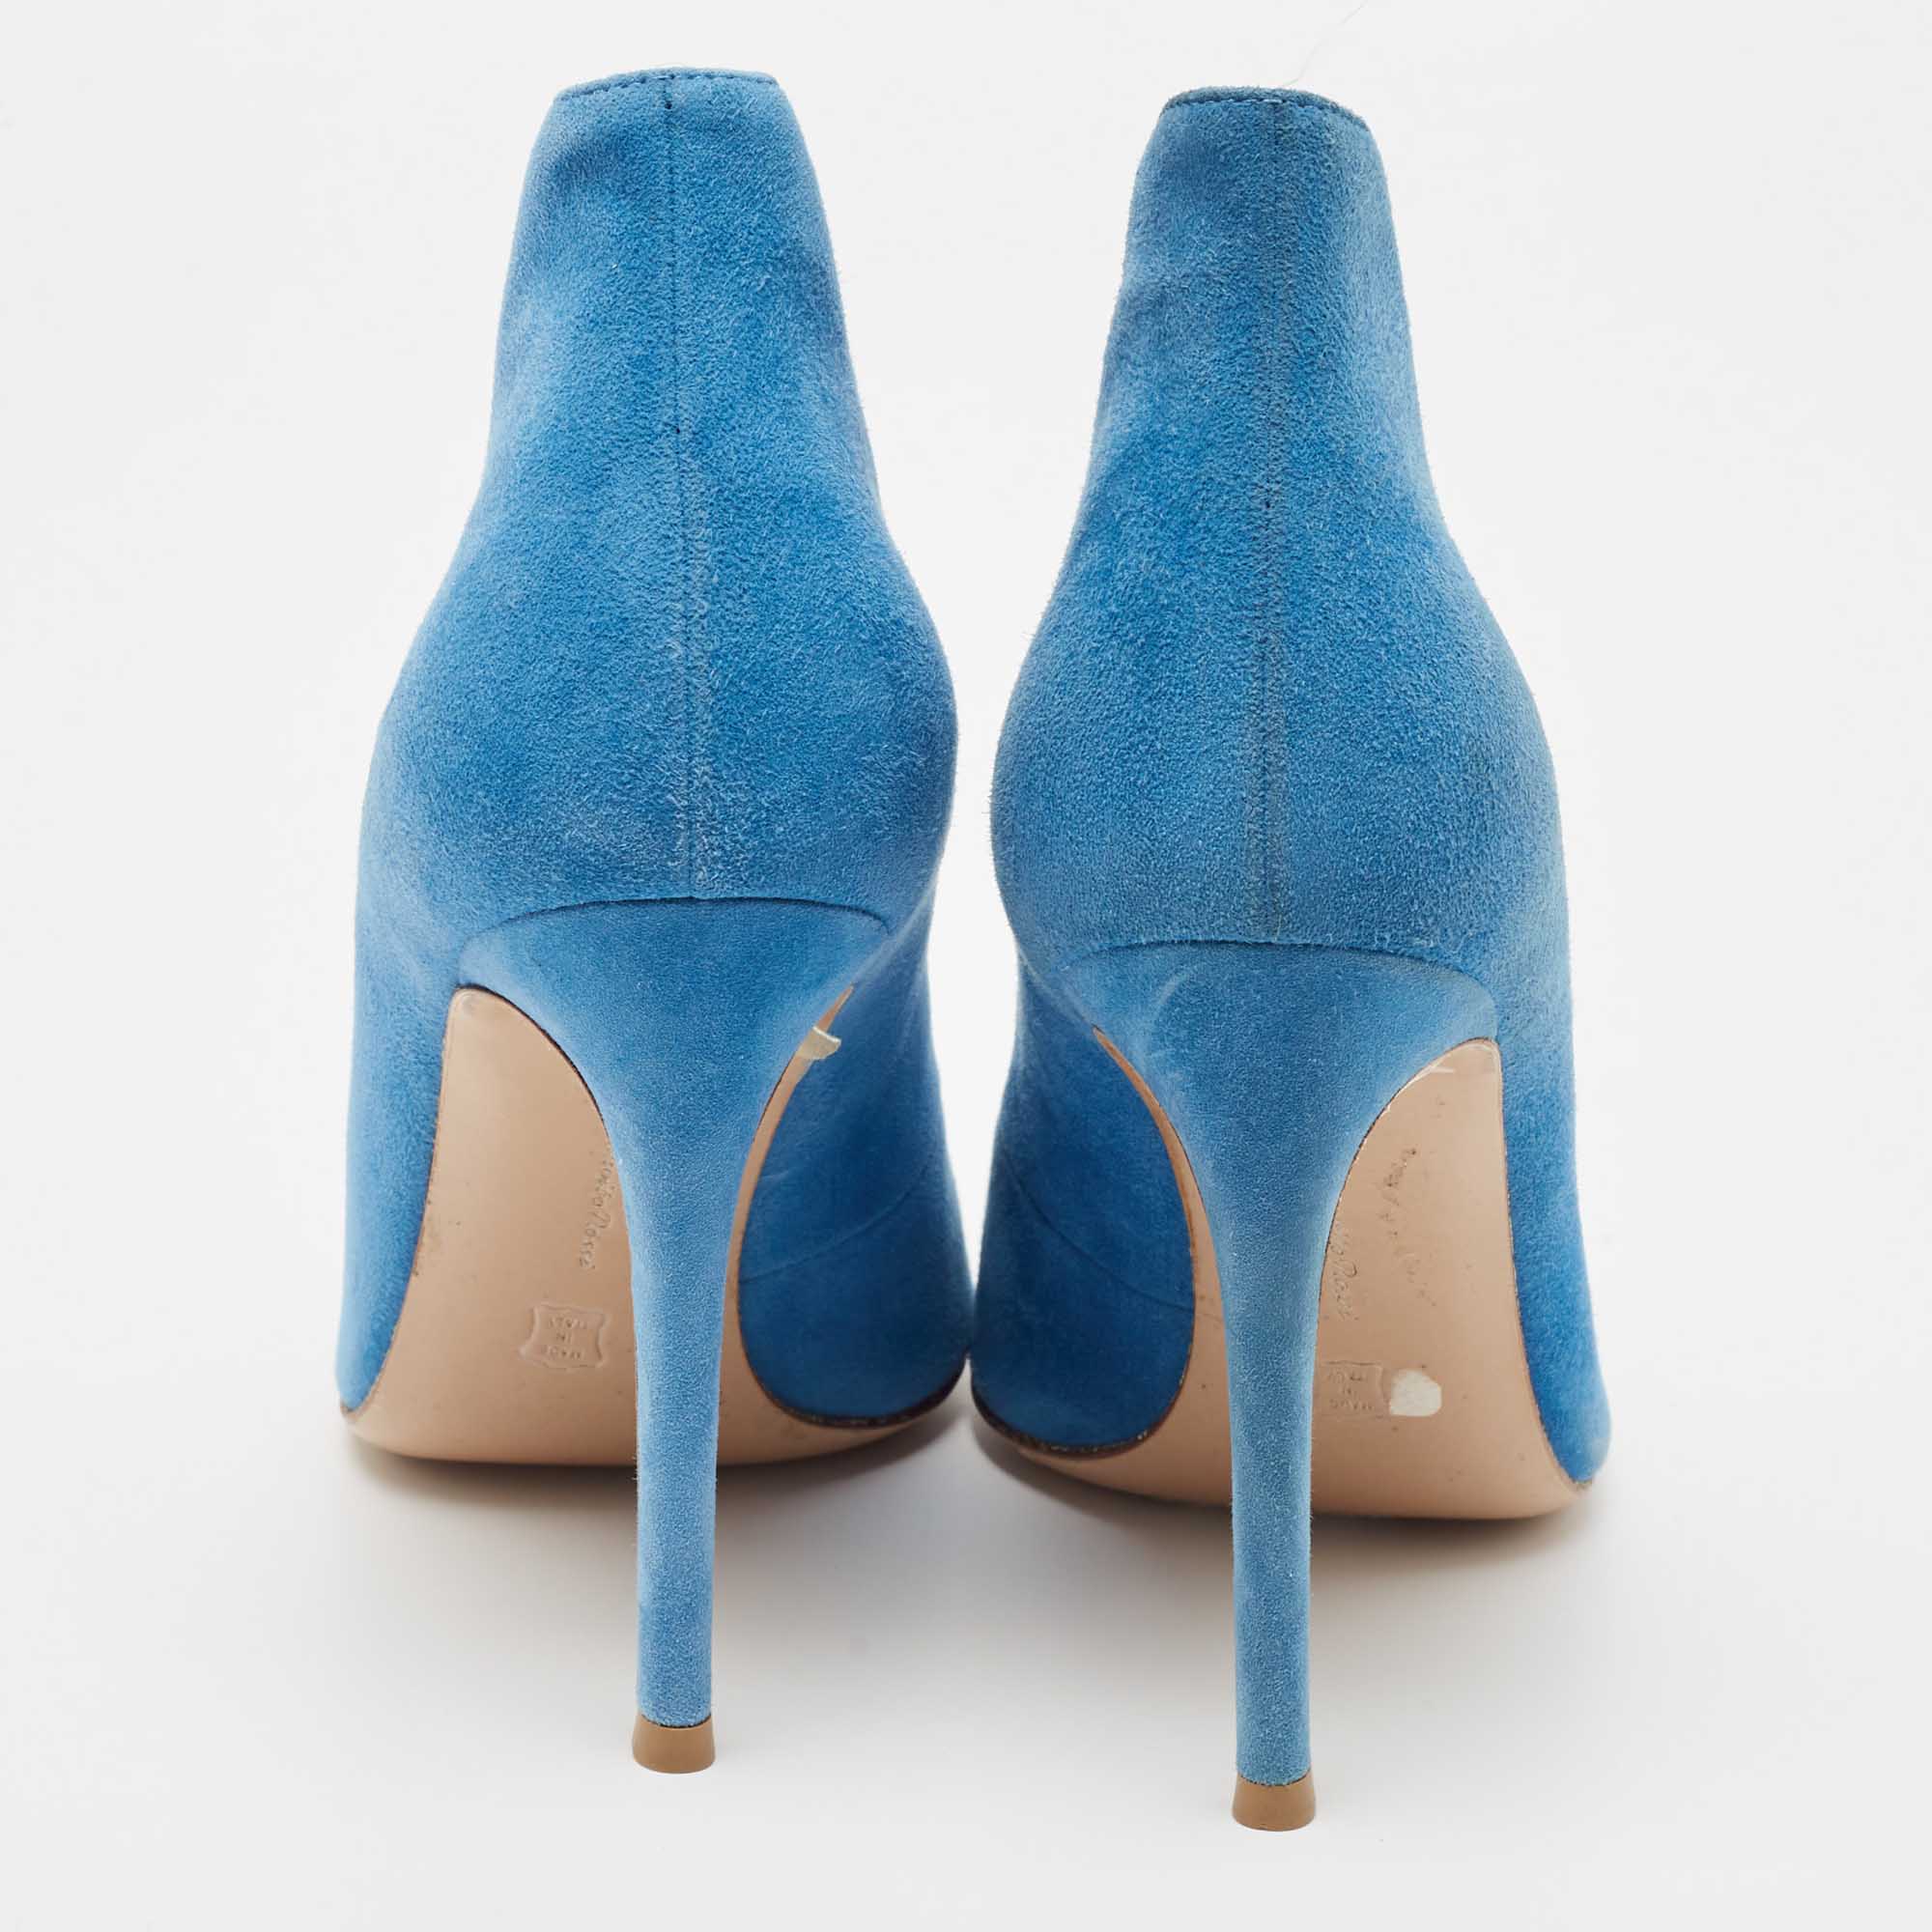 Gianvito Rossi Blue Suede Vamp Booties Size 38